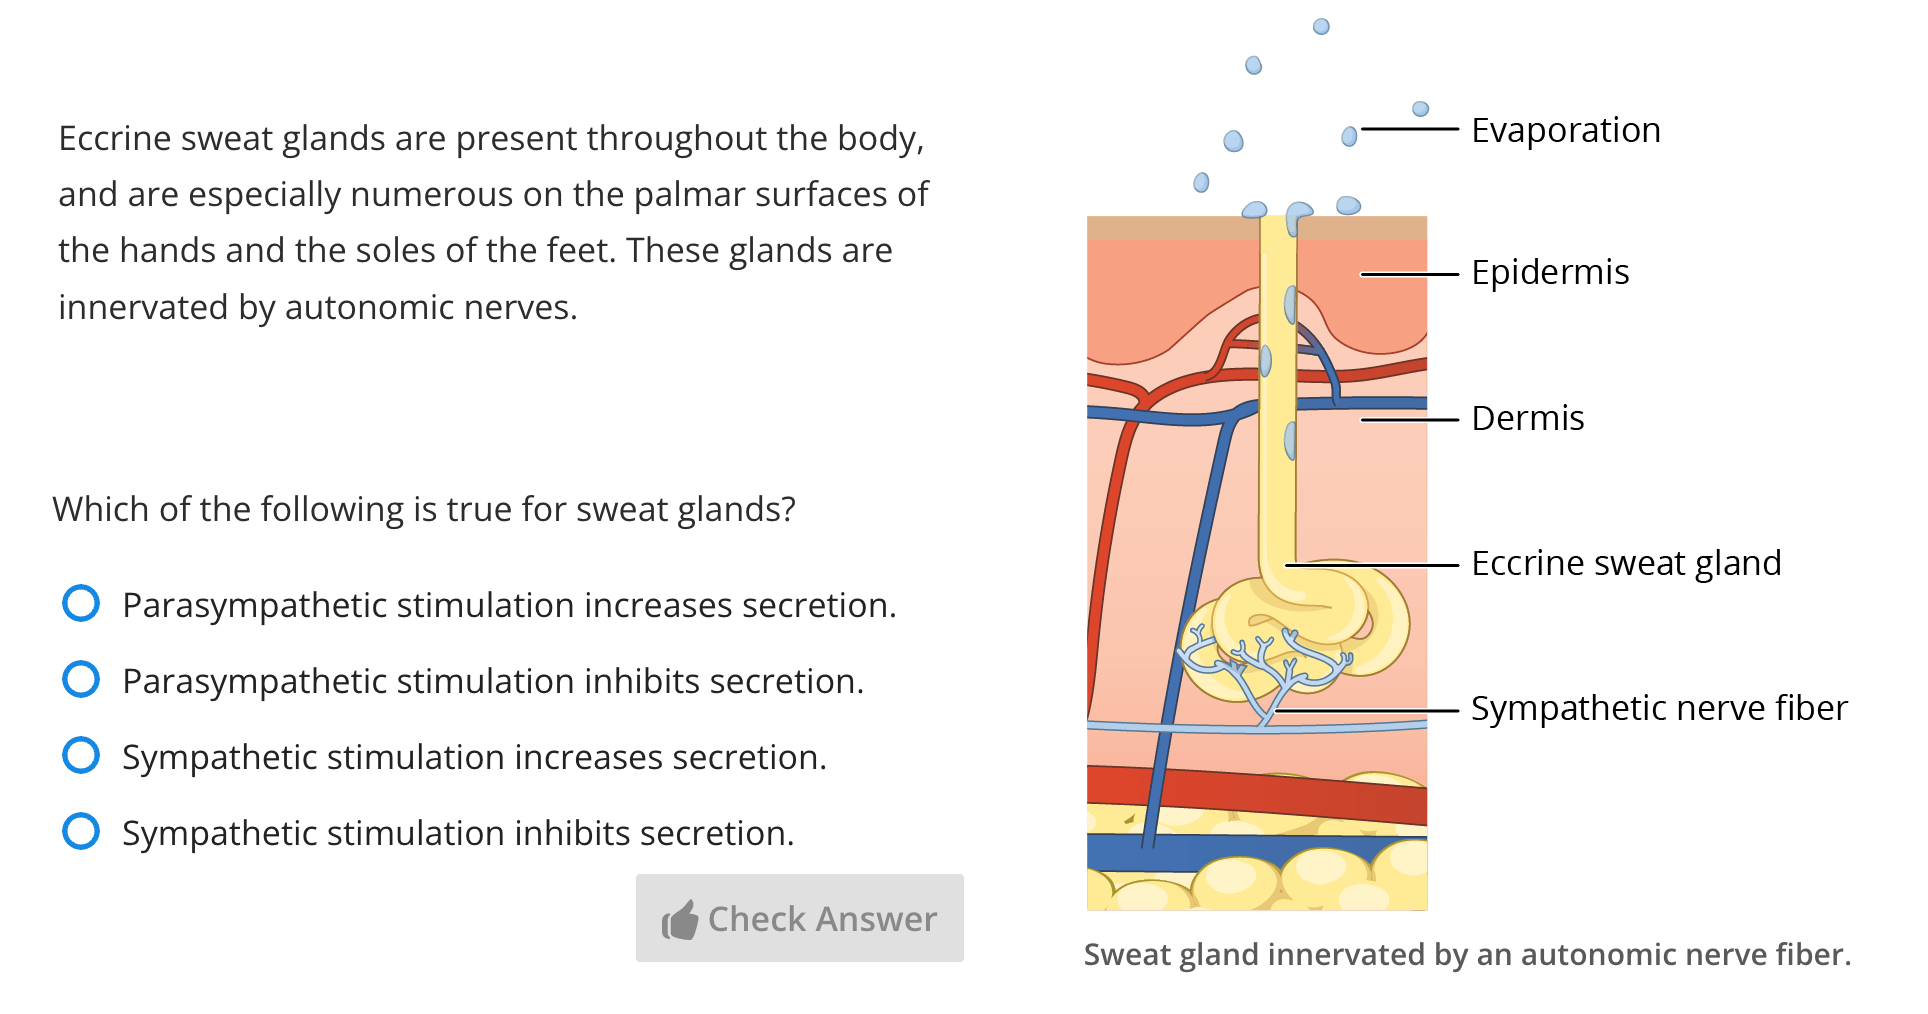 Text, a multiple-choice question, and an image on sweat glands.